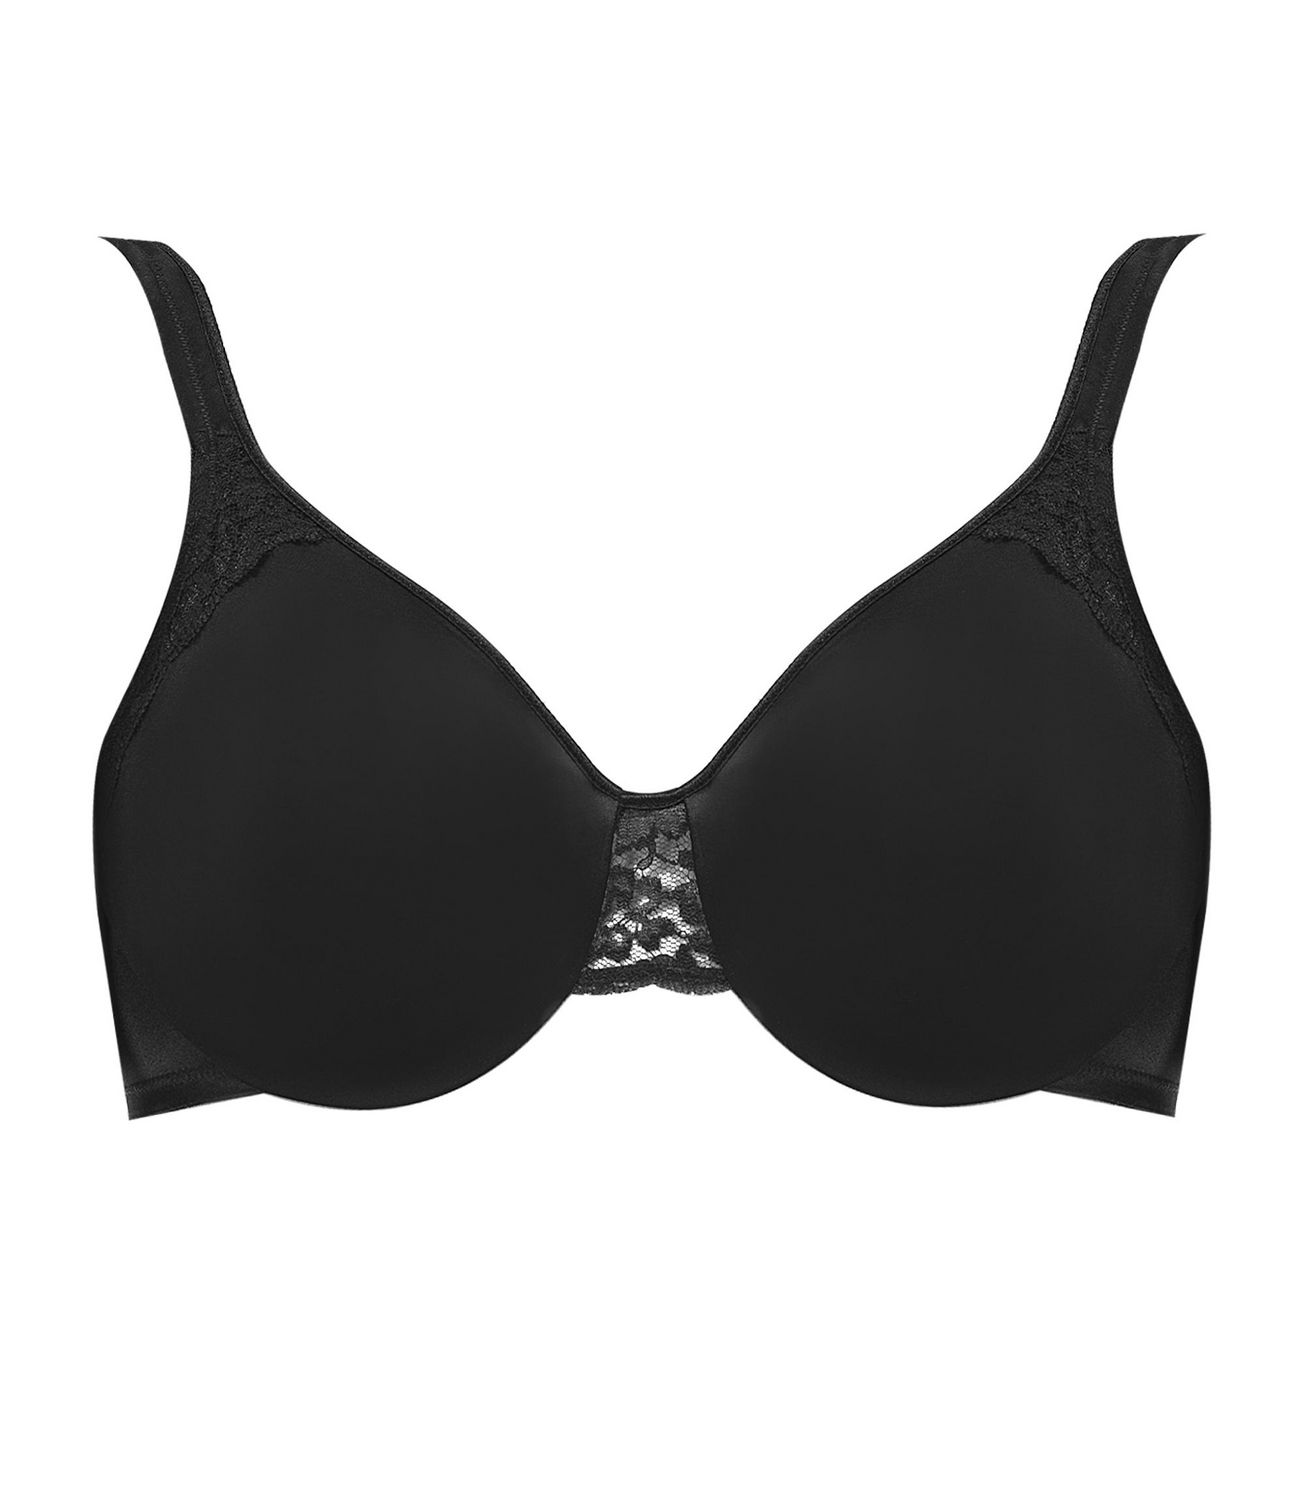 42ff Black Minimiser Bra - Get Best Price from Manufacturers & Suppliers in  India